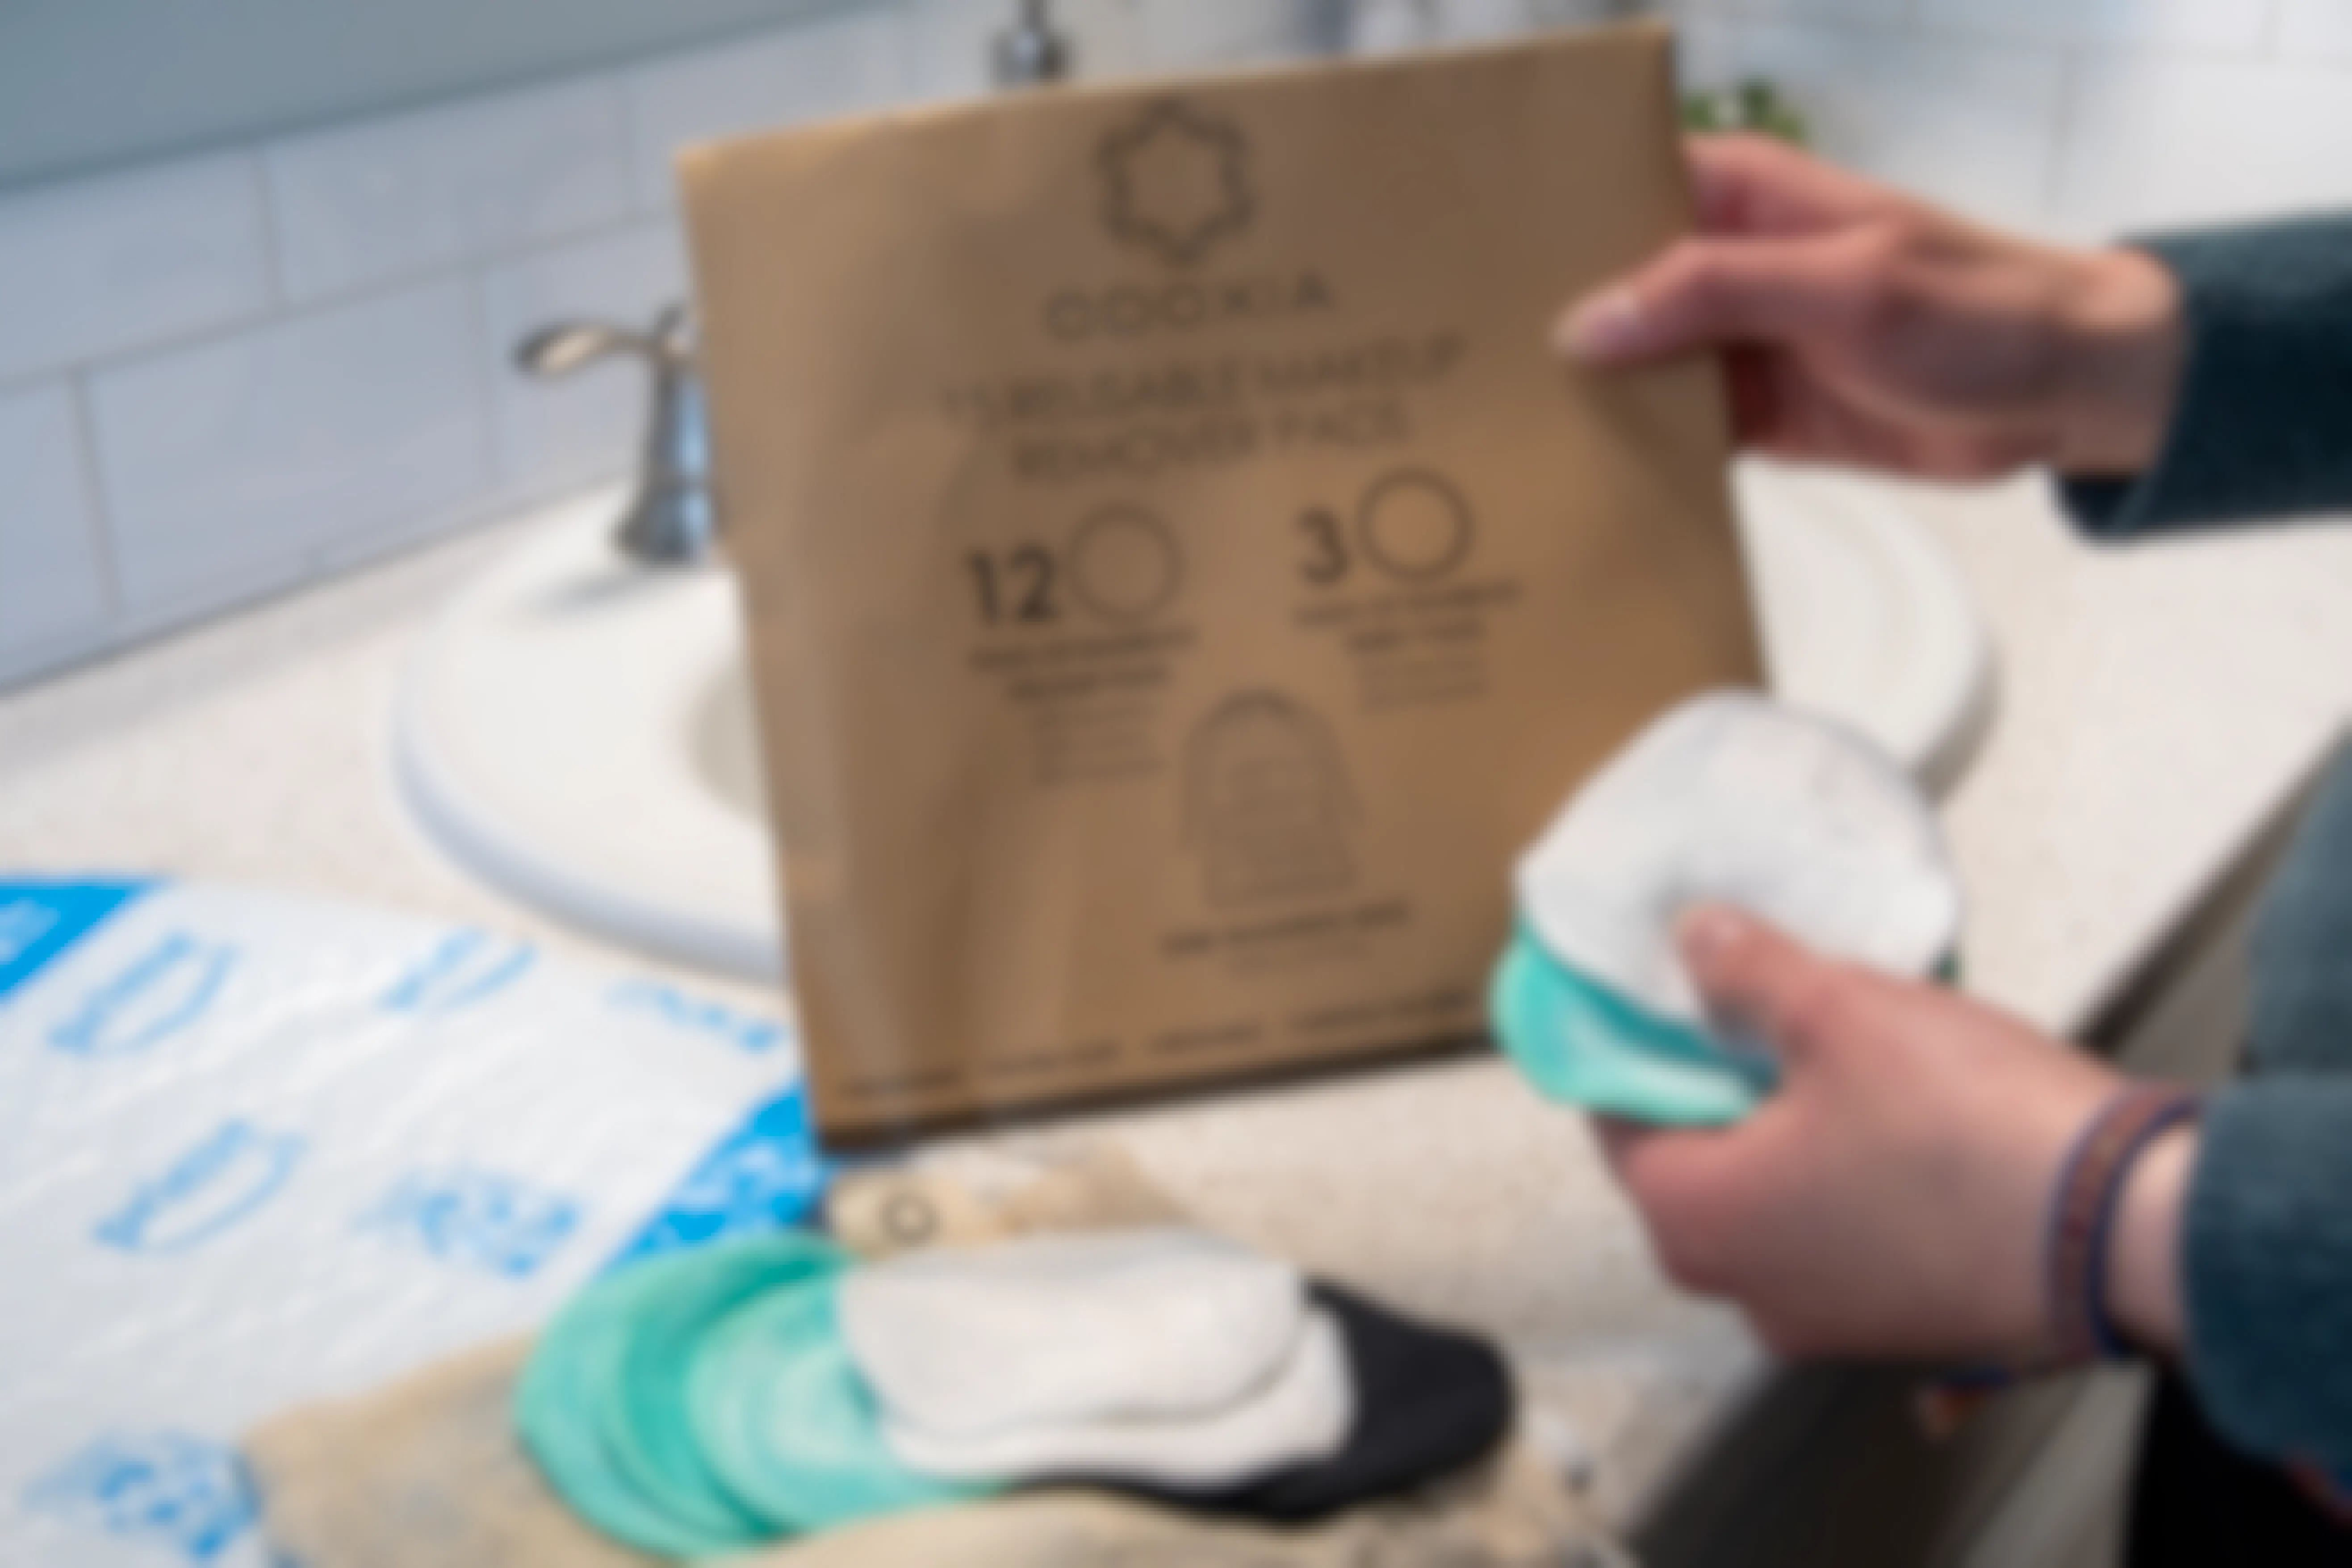 a woman removing reusable makeup remover pads from a package on a bathroom counter